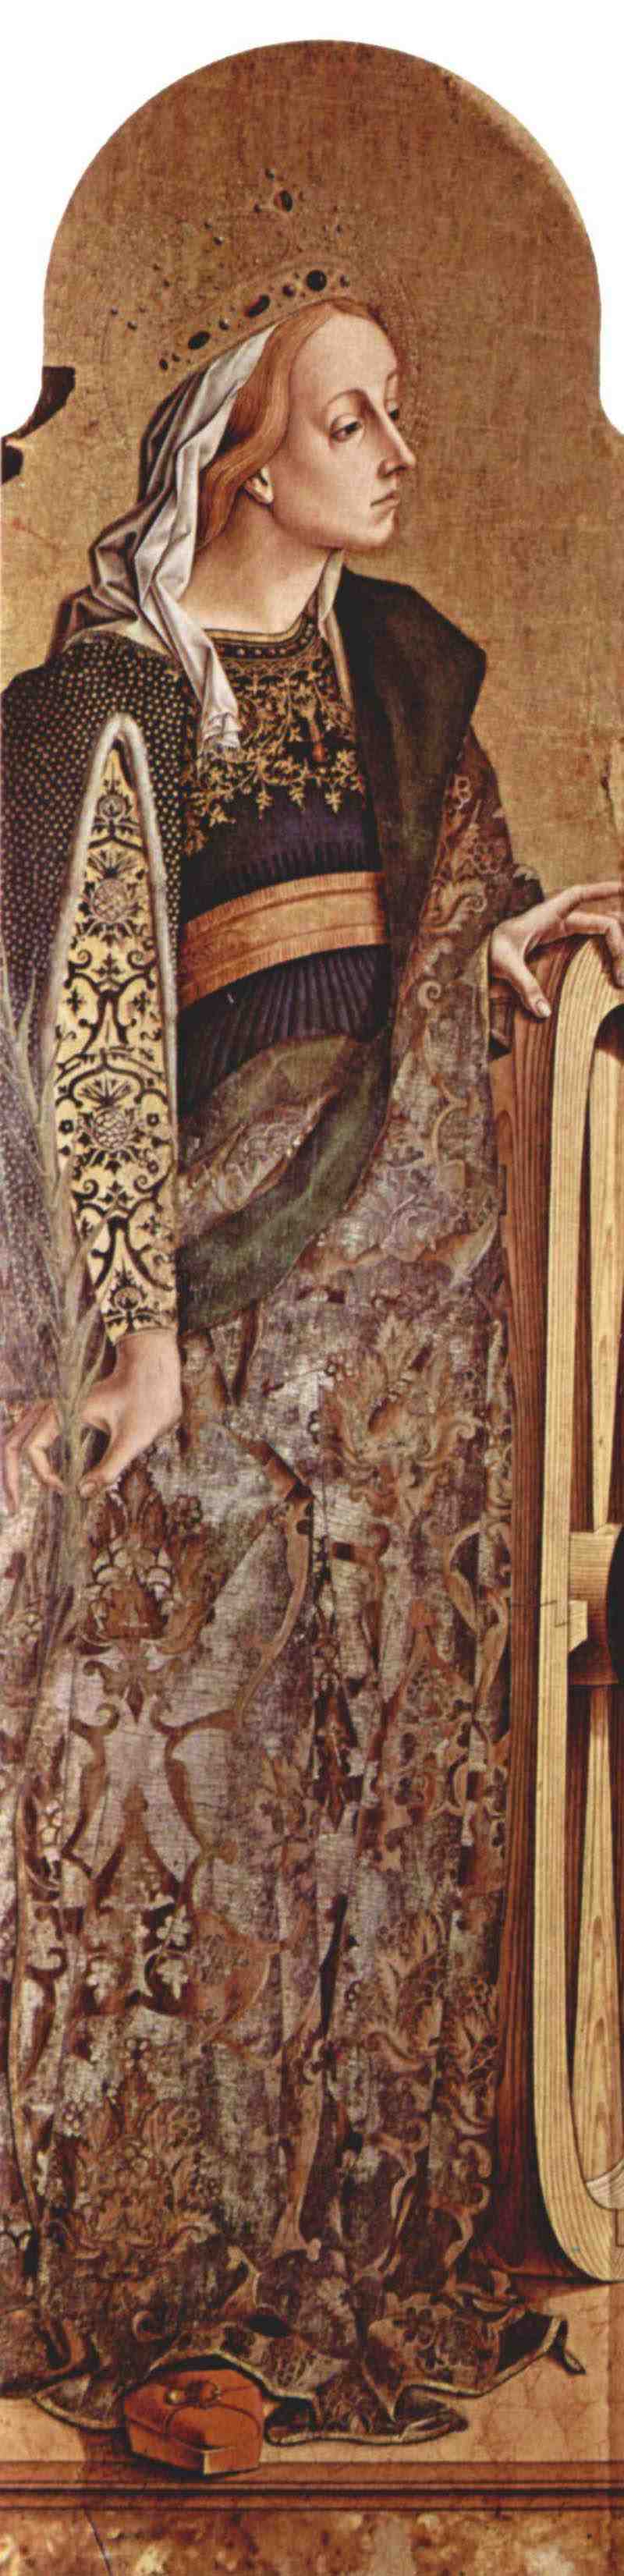 Altarpolyptychon of San Francesco at Montefiore dell 'Aso, left outer panel: St. Catherine of Alexandria. Carlo Crivelli